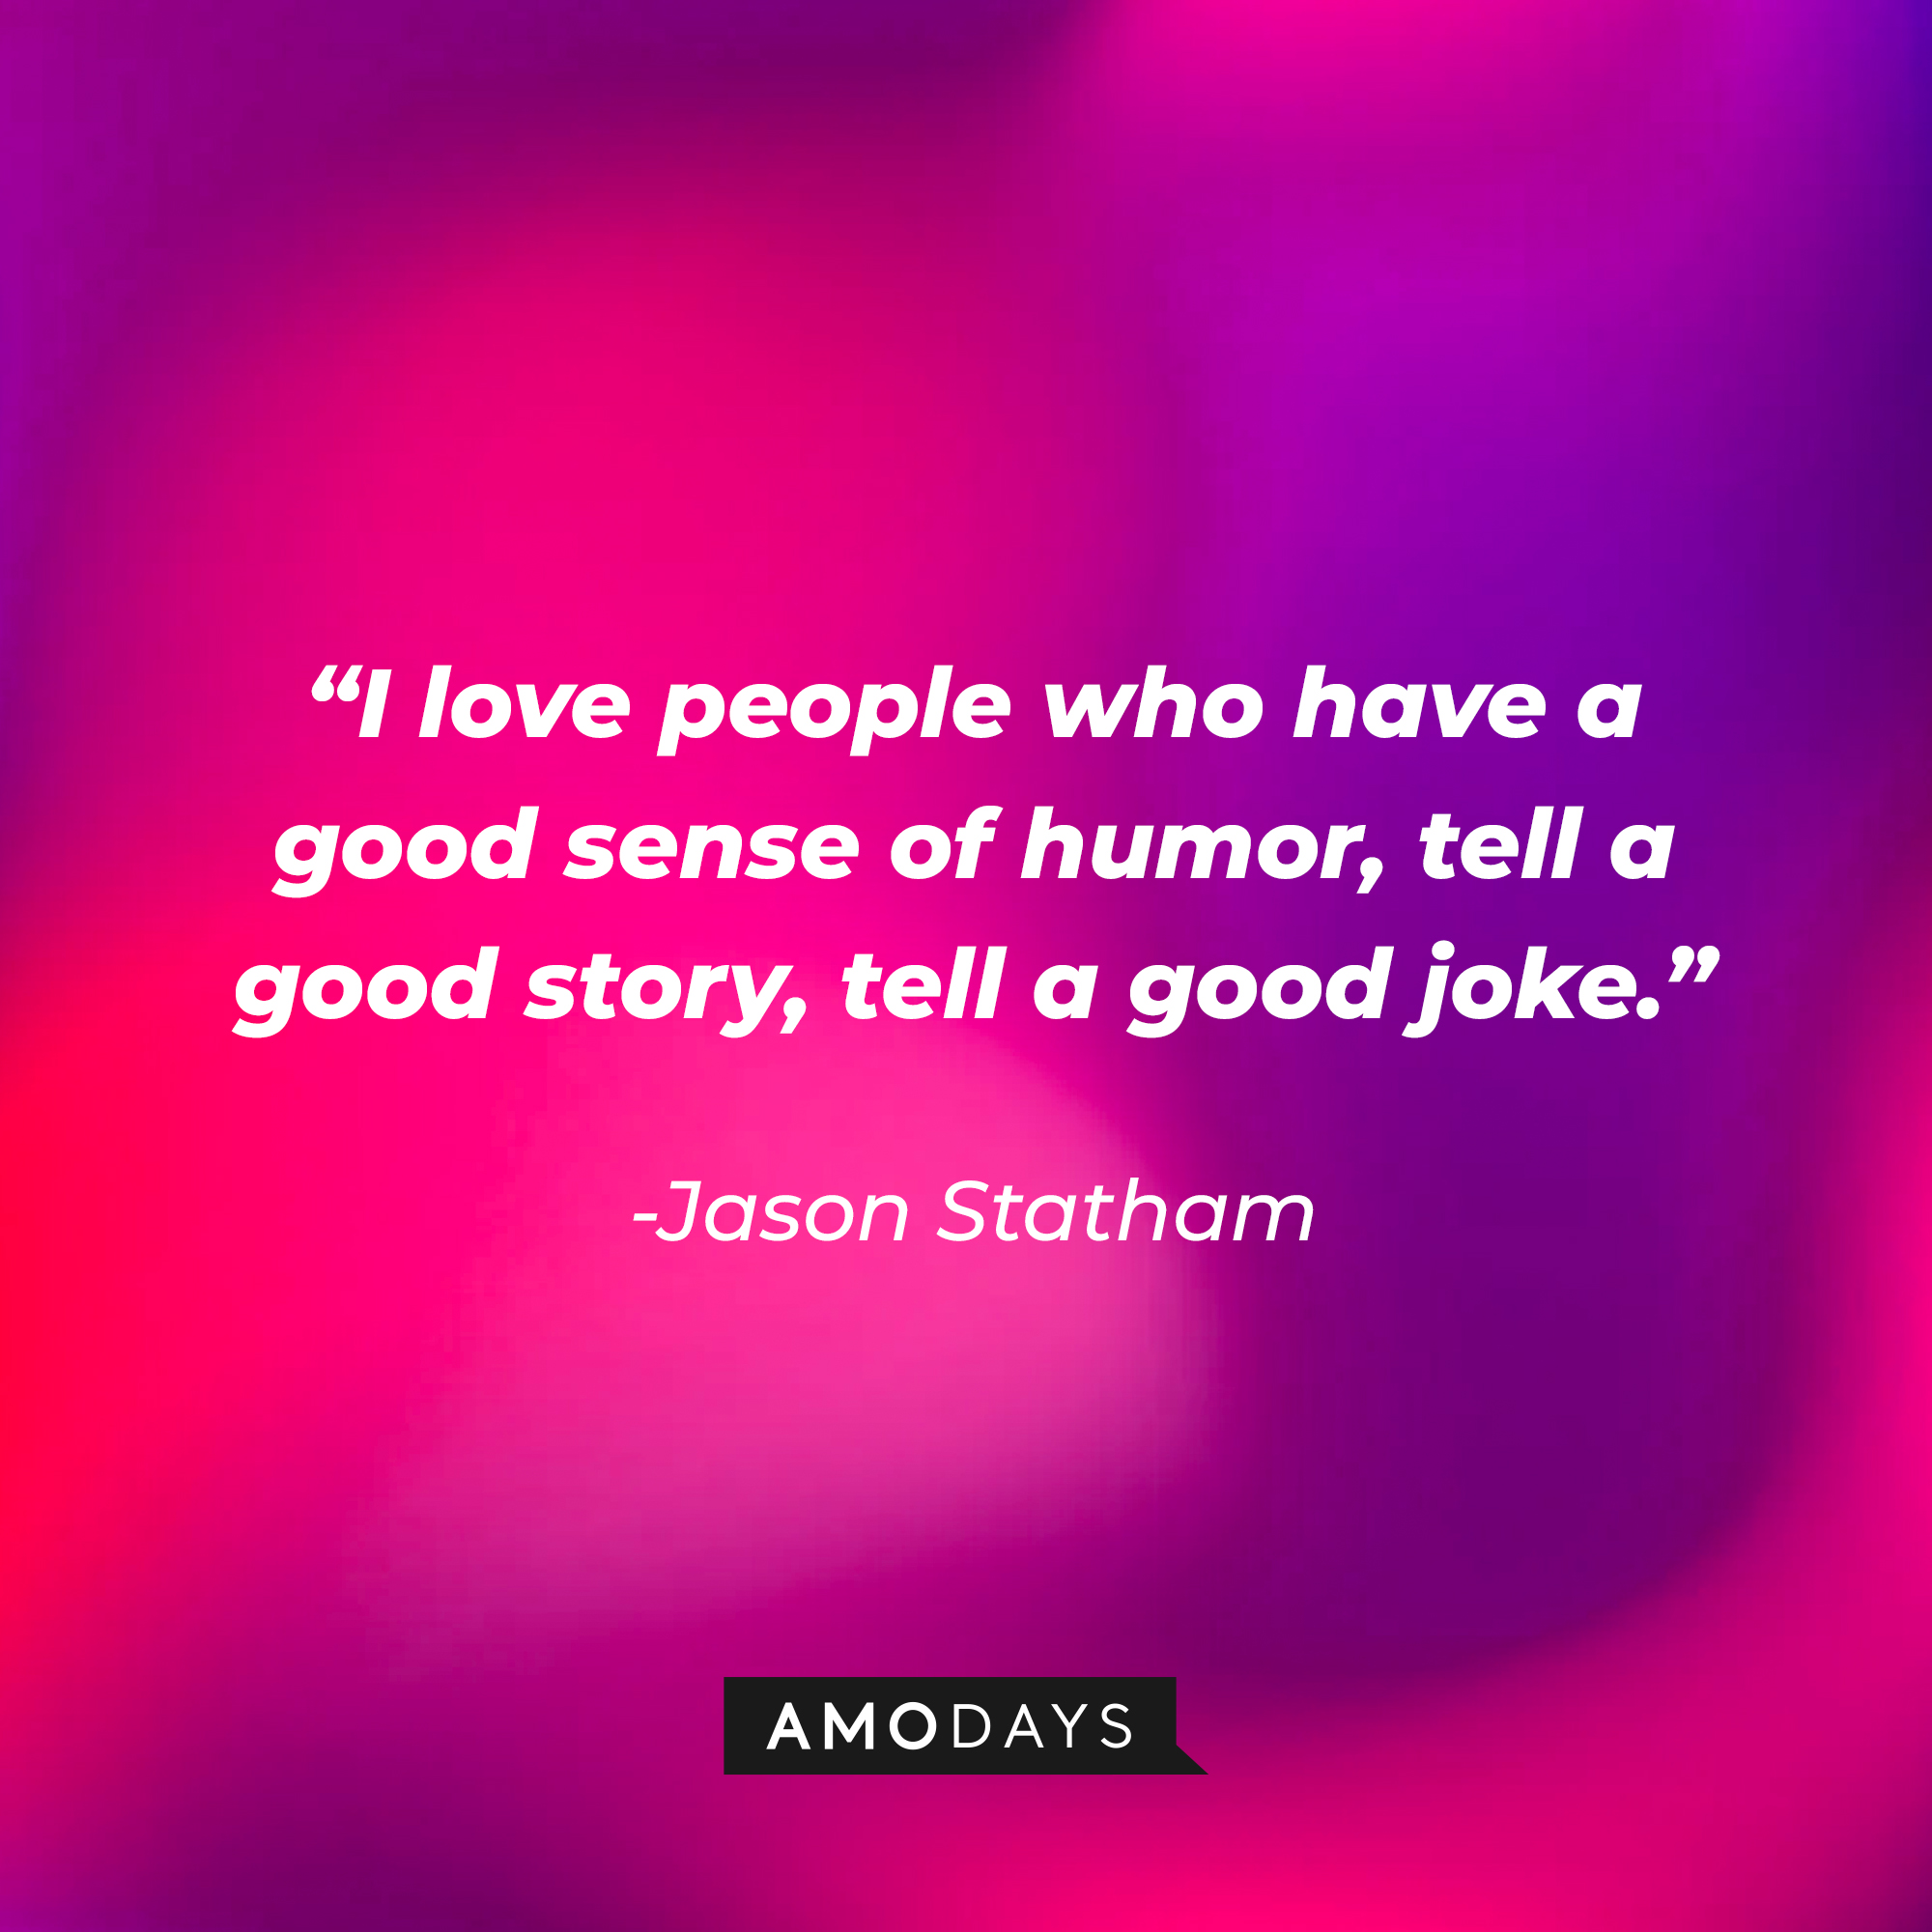 Jason Statham's quote: “I love people who have a good sense of humor, tell a good story, tell a good joke.” | Source: Amodays